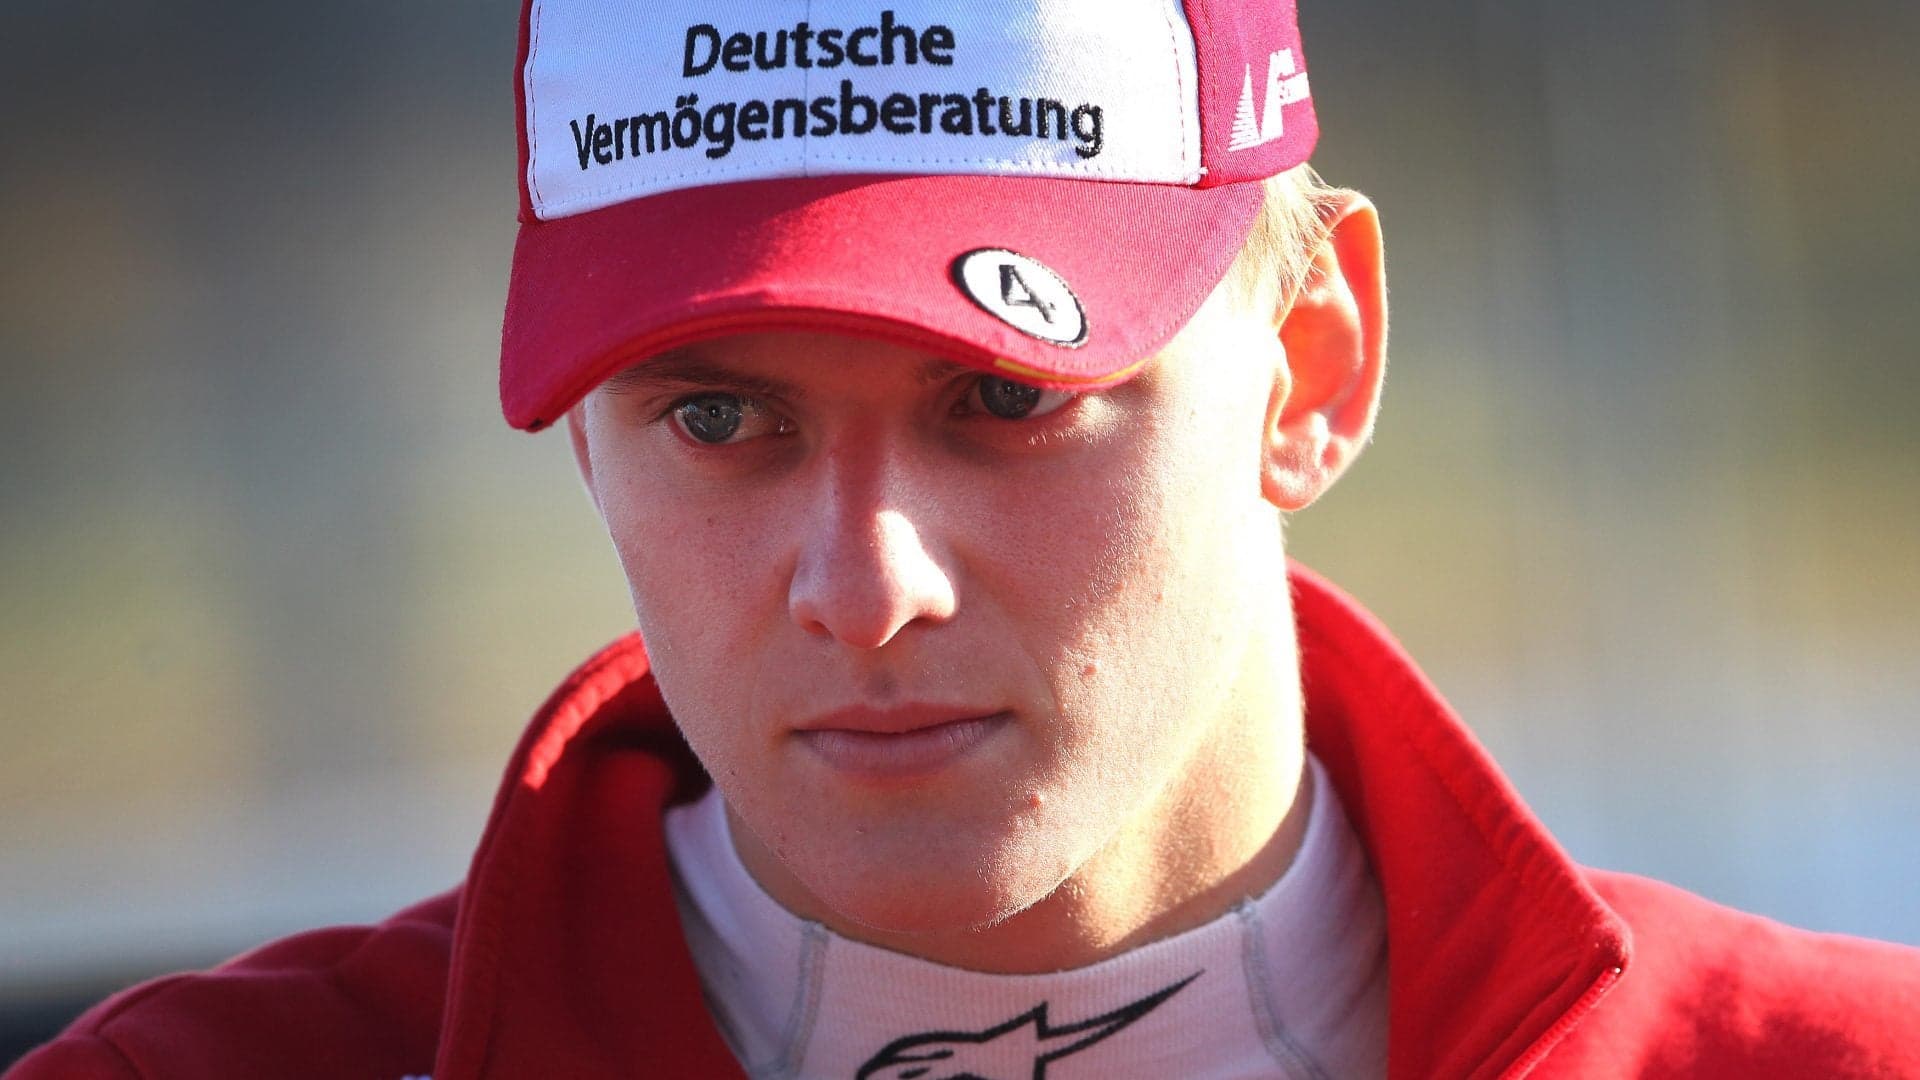 Mick Schumacher Reportedly Signs With Ferrari Driver Academy